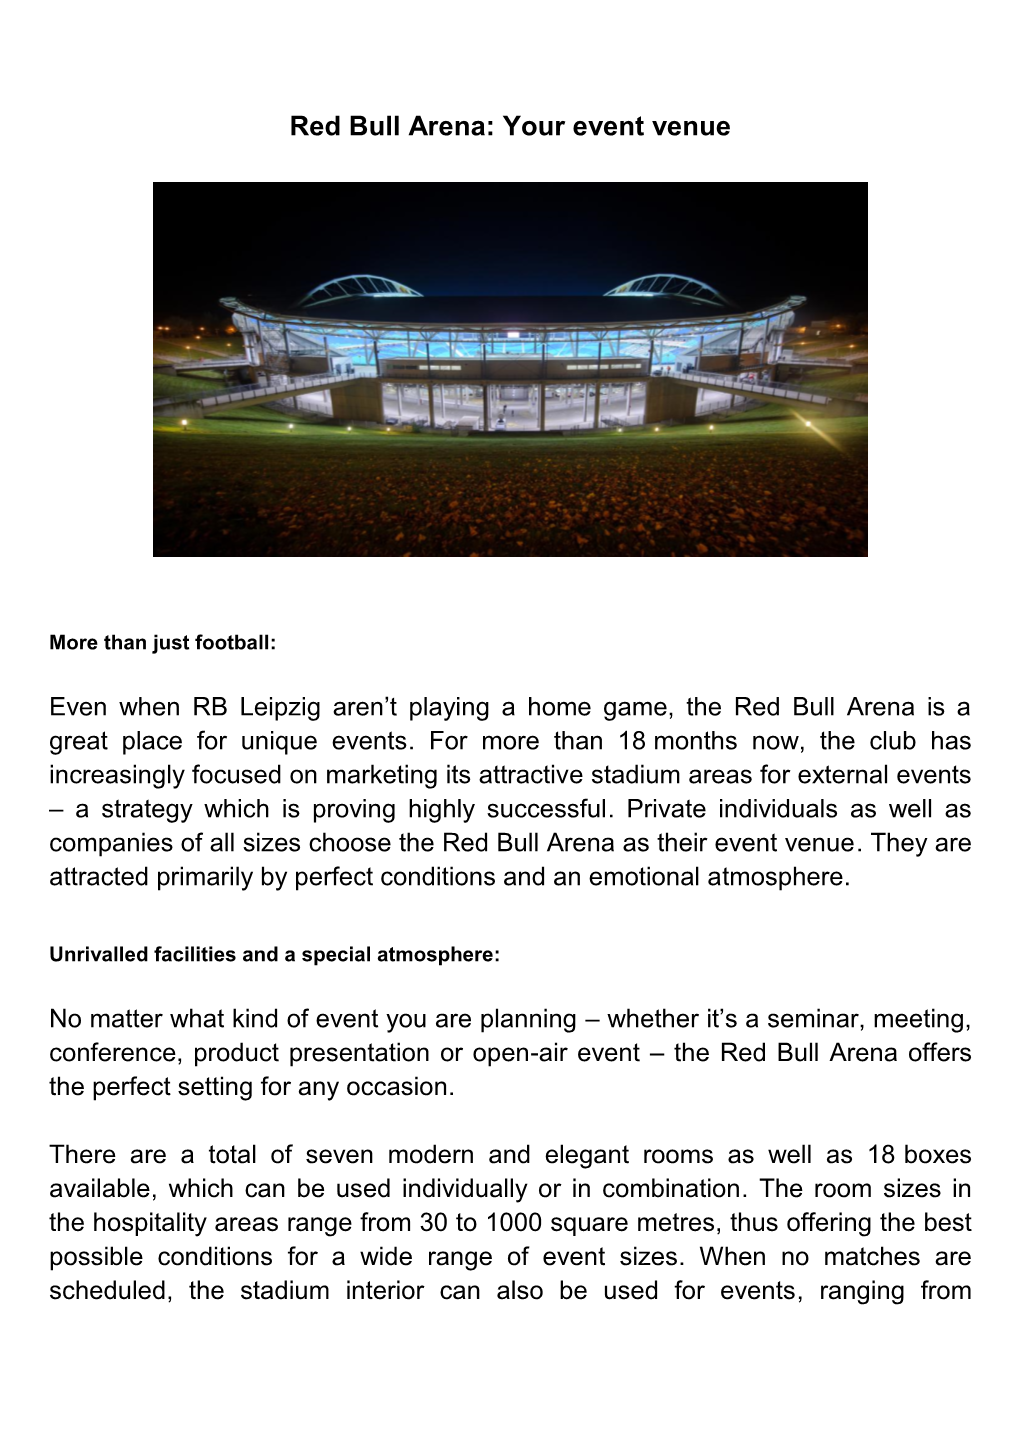 Red Bull Arena: Your Event Venue